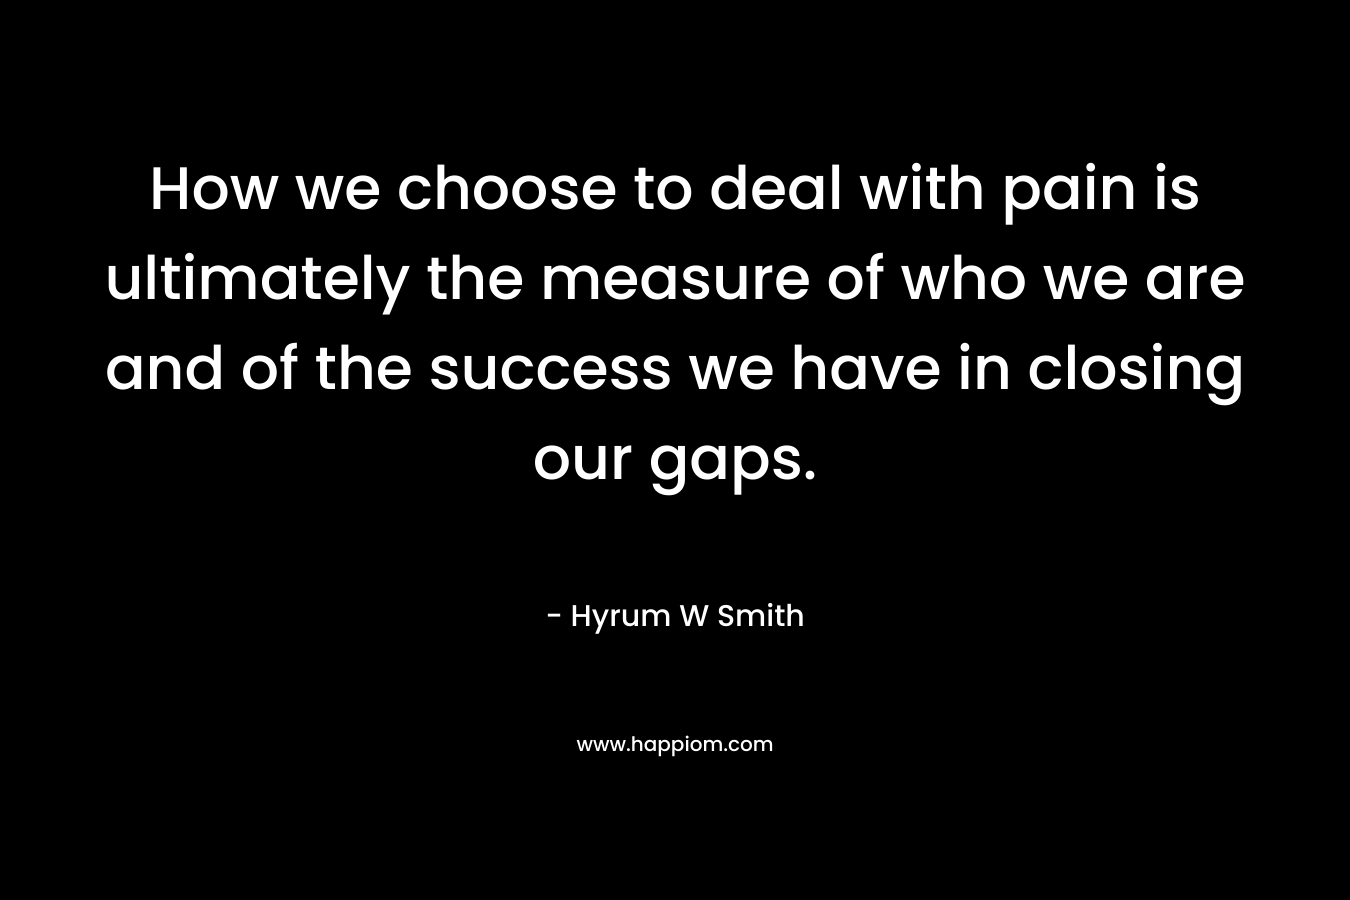 How we choose to deal with pain is ultimately the measure of who we are and of the success we have in closing our gaps.